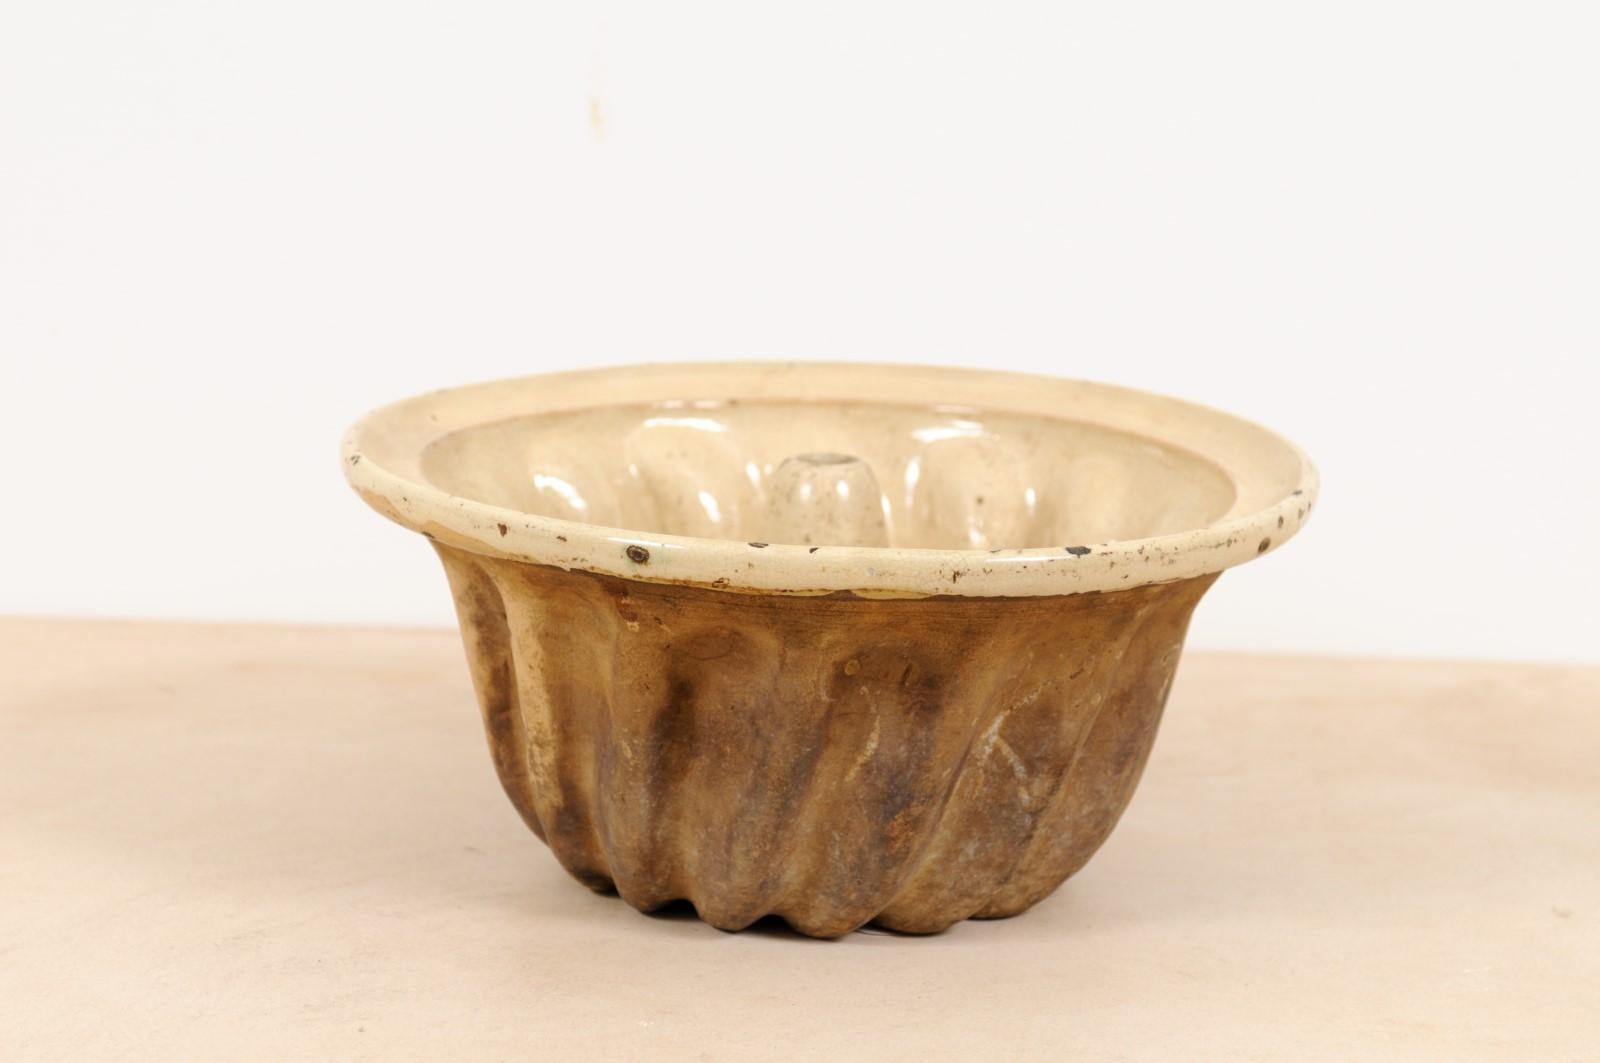 A French terracotta Kouglof cake mold from the 19th century, with beige and brown tones. Created in France during the 19th century, this Kouglof mold will make for a great addition to any kitchen. Boasting a nicely weathered patina, this Kouglof